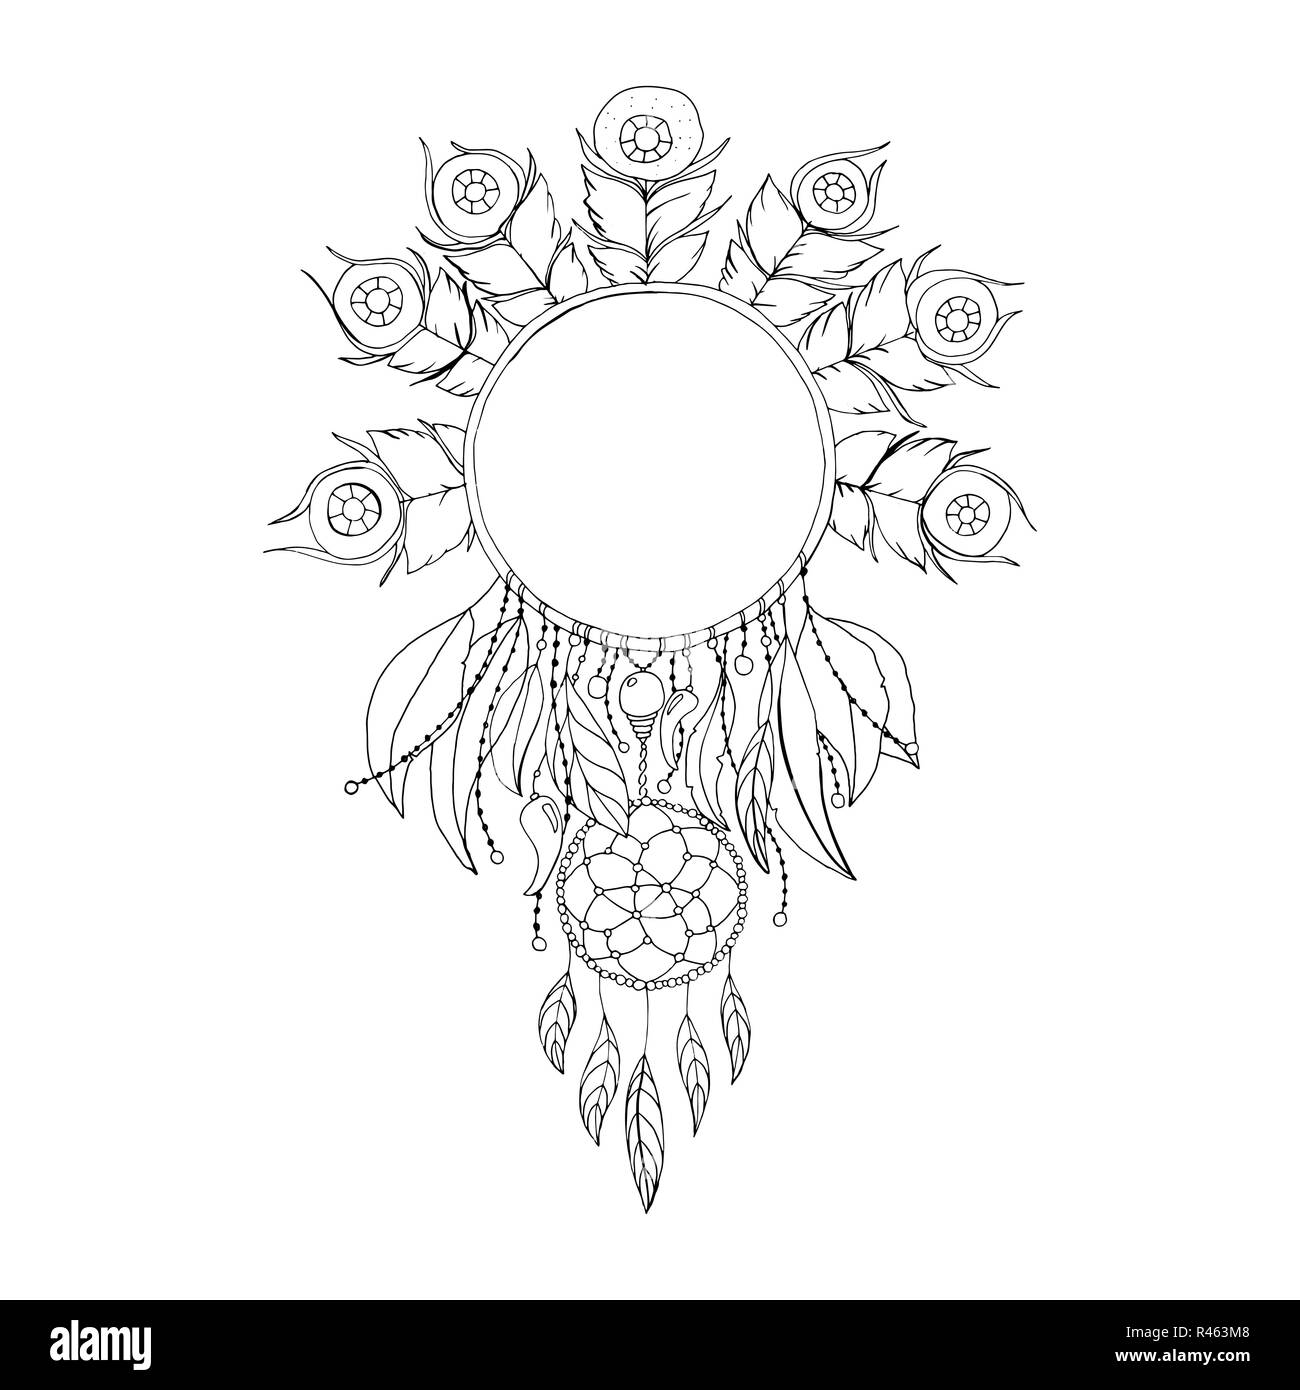 Black and White Dreamcatcher Isolated Vector Symbol. Fashion Illustration for Antistress Coloring Book or Page Design Stock Vector